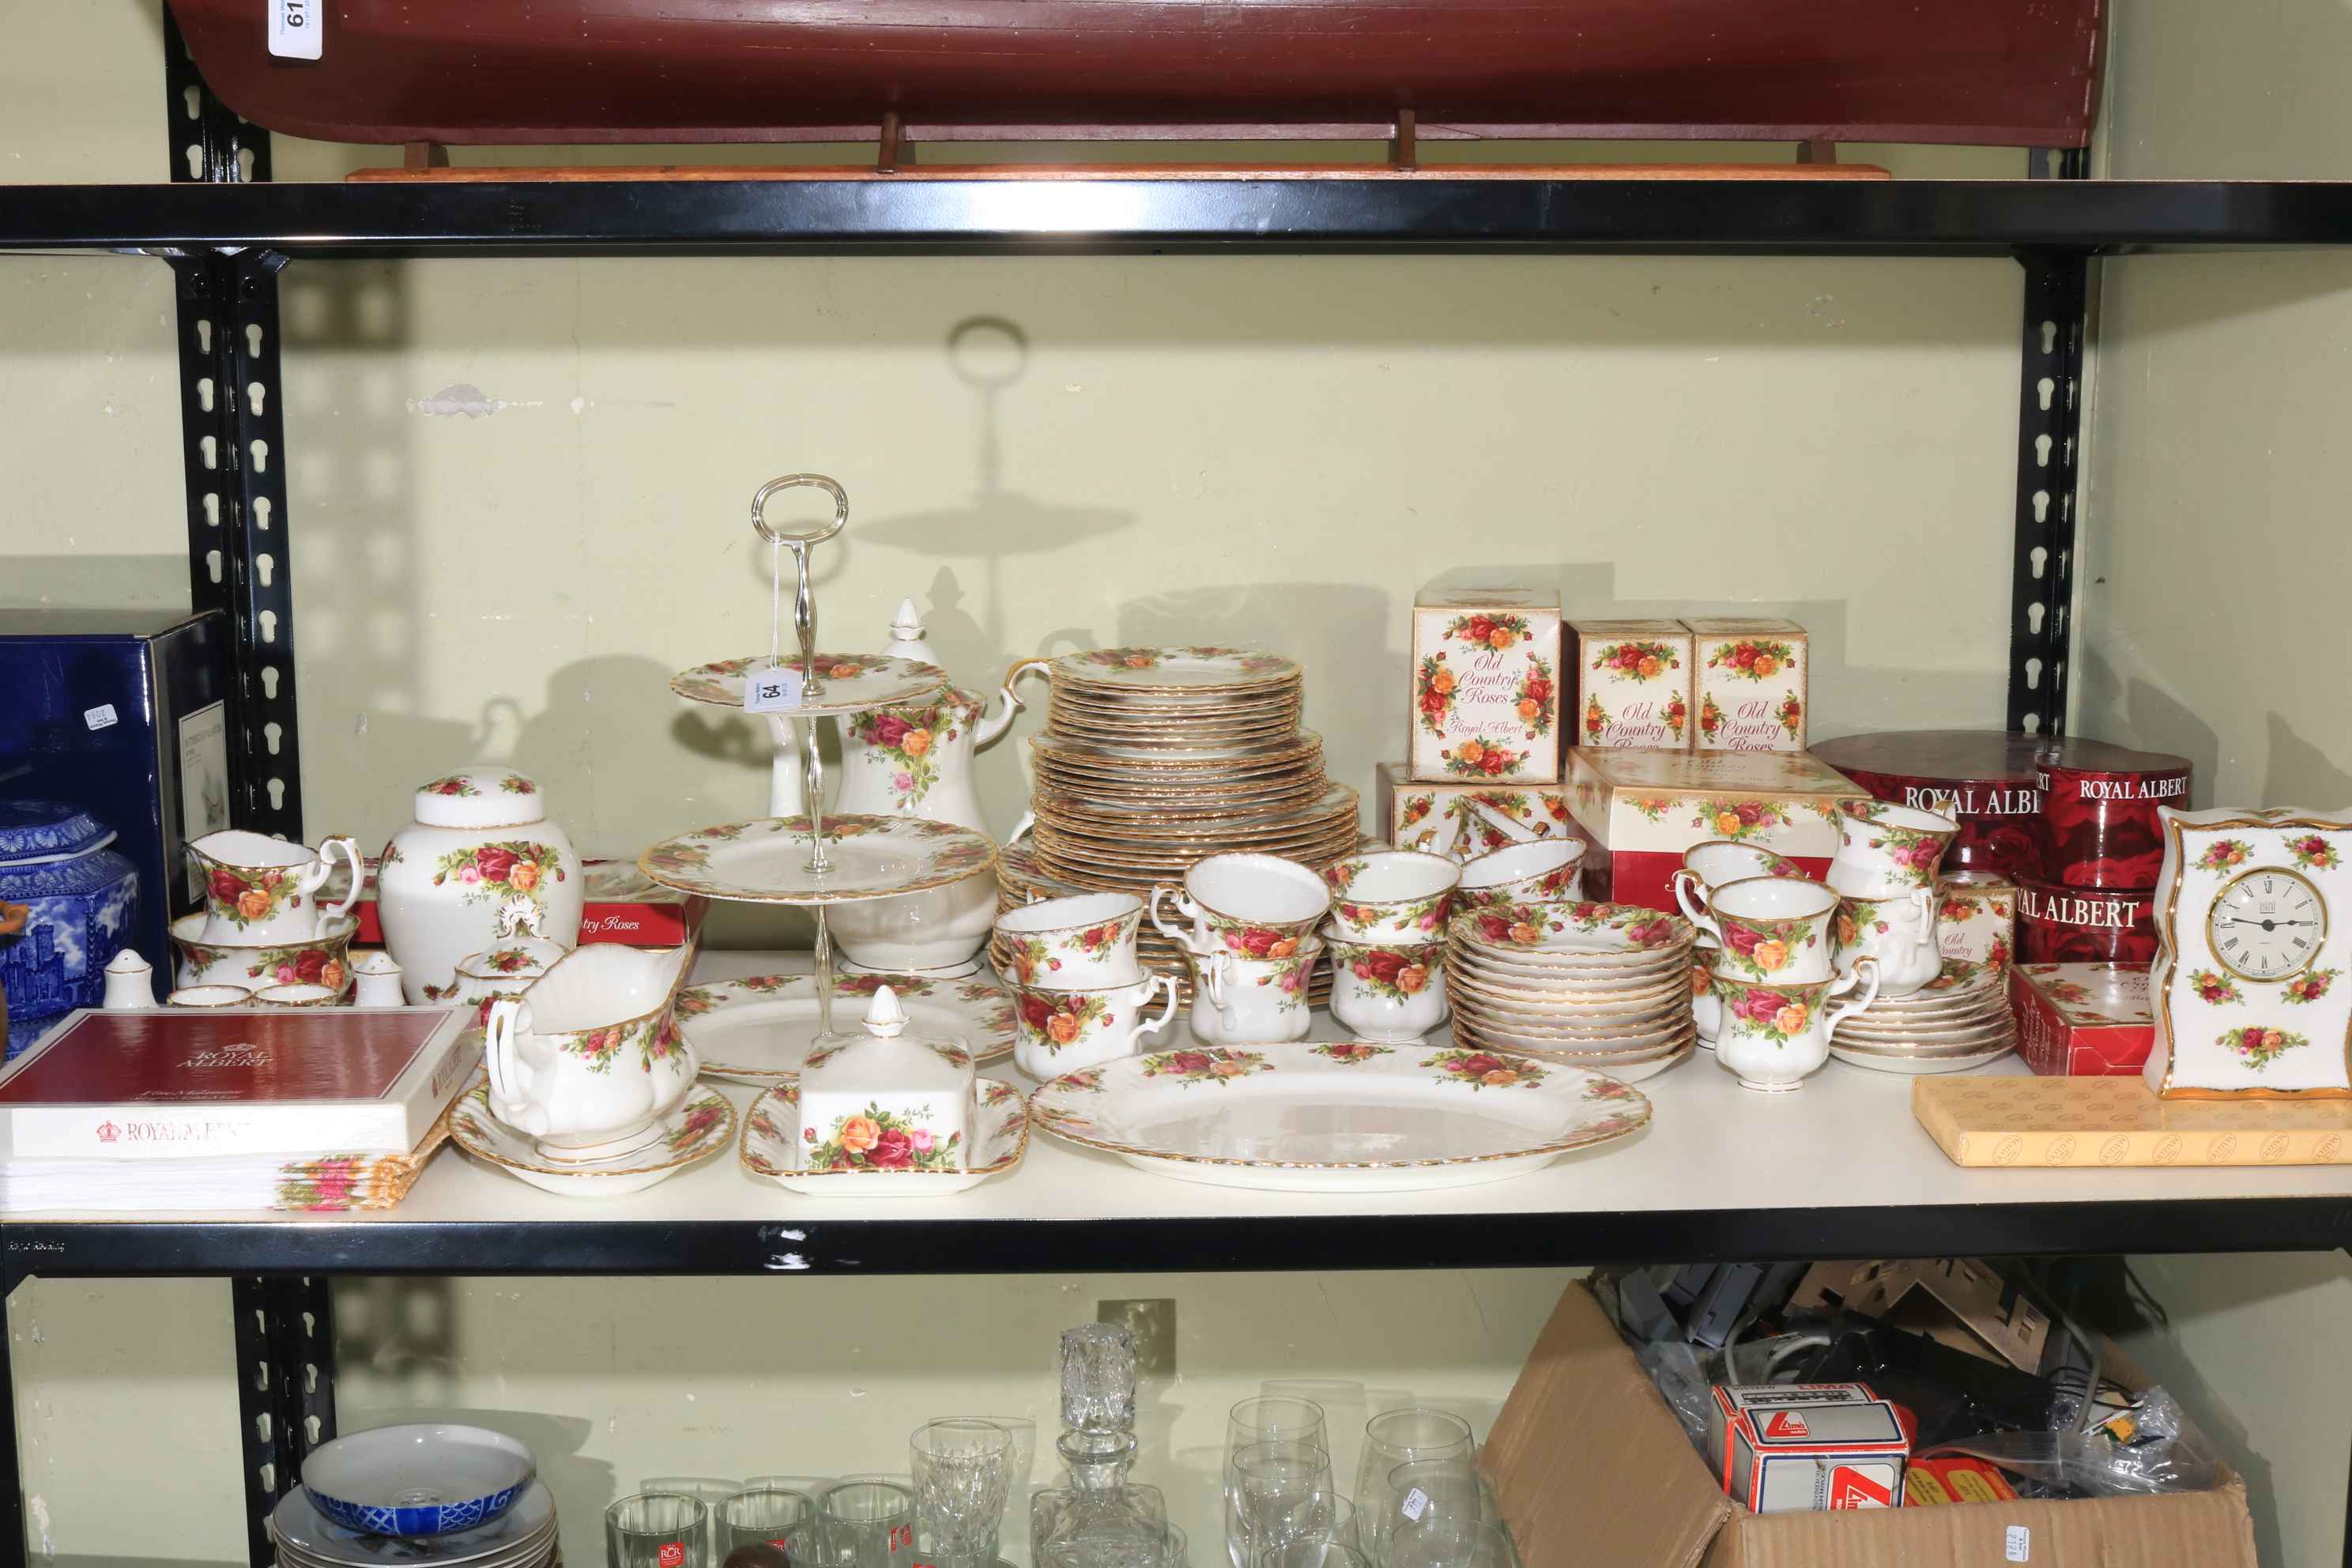 Royal Albert Old Country Roses including teapot, dinner plates, approximately 100 pieces.